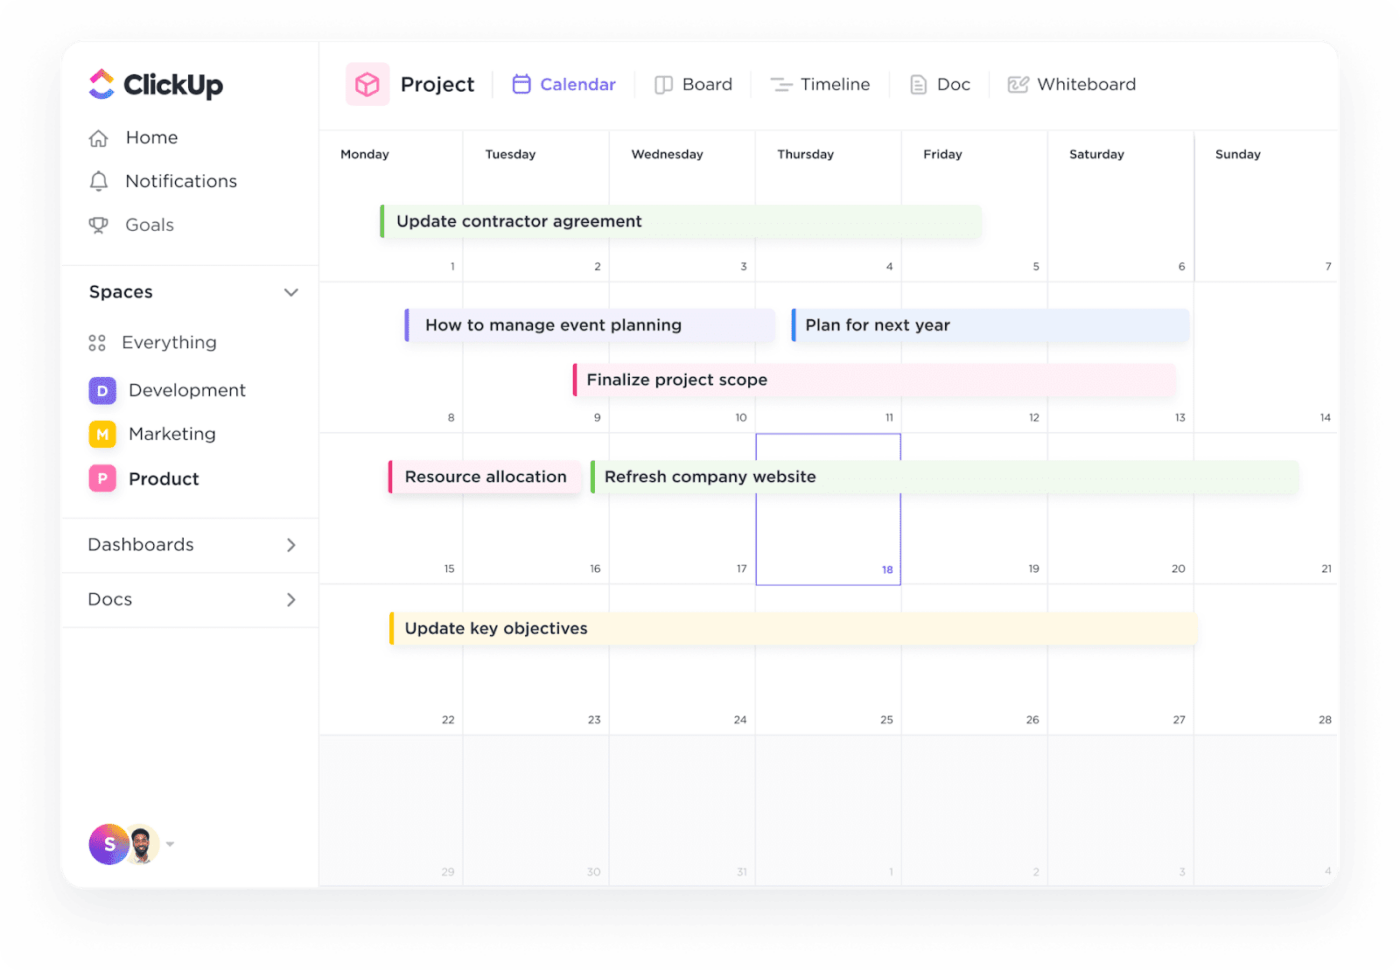 Easily view and manage your entire week's calendar with ClickUp's Calendar view